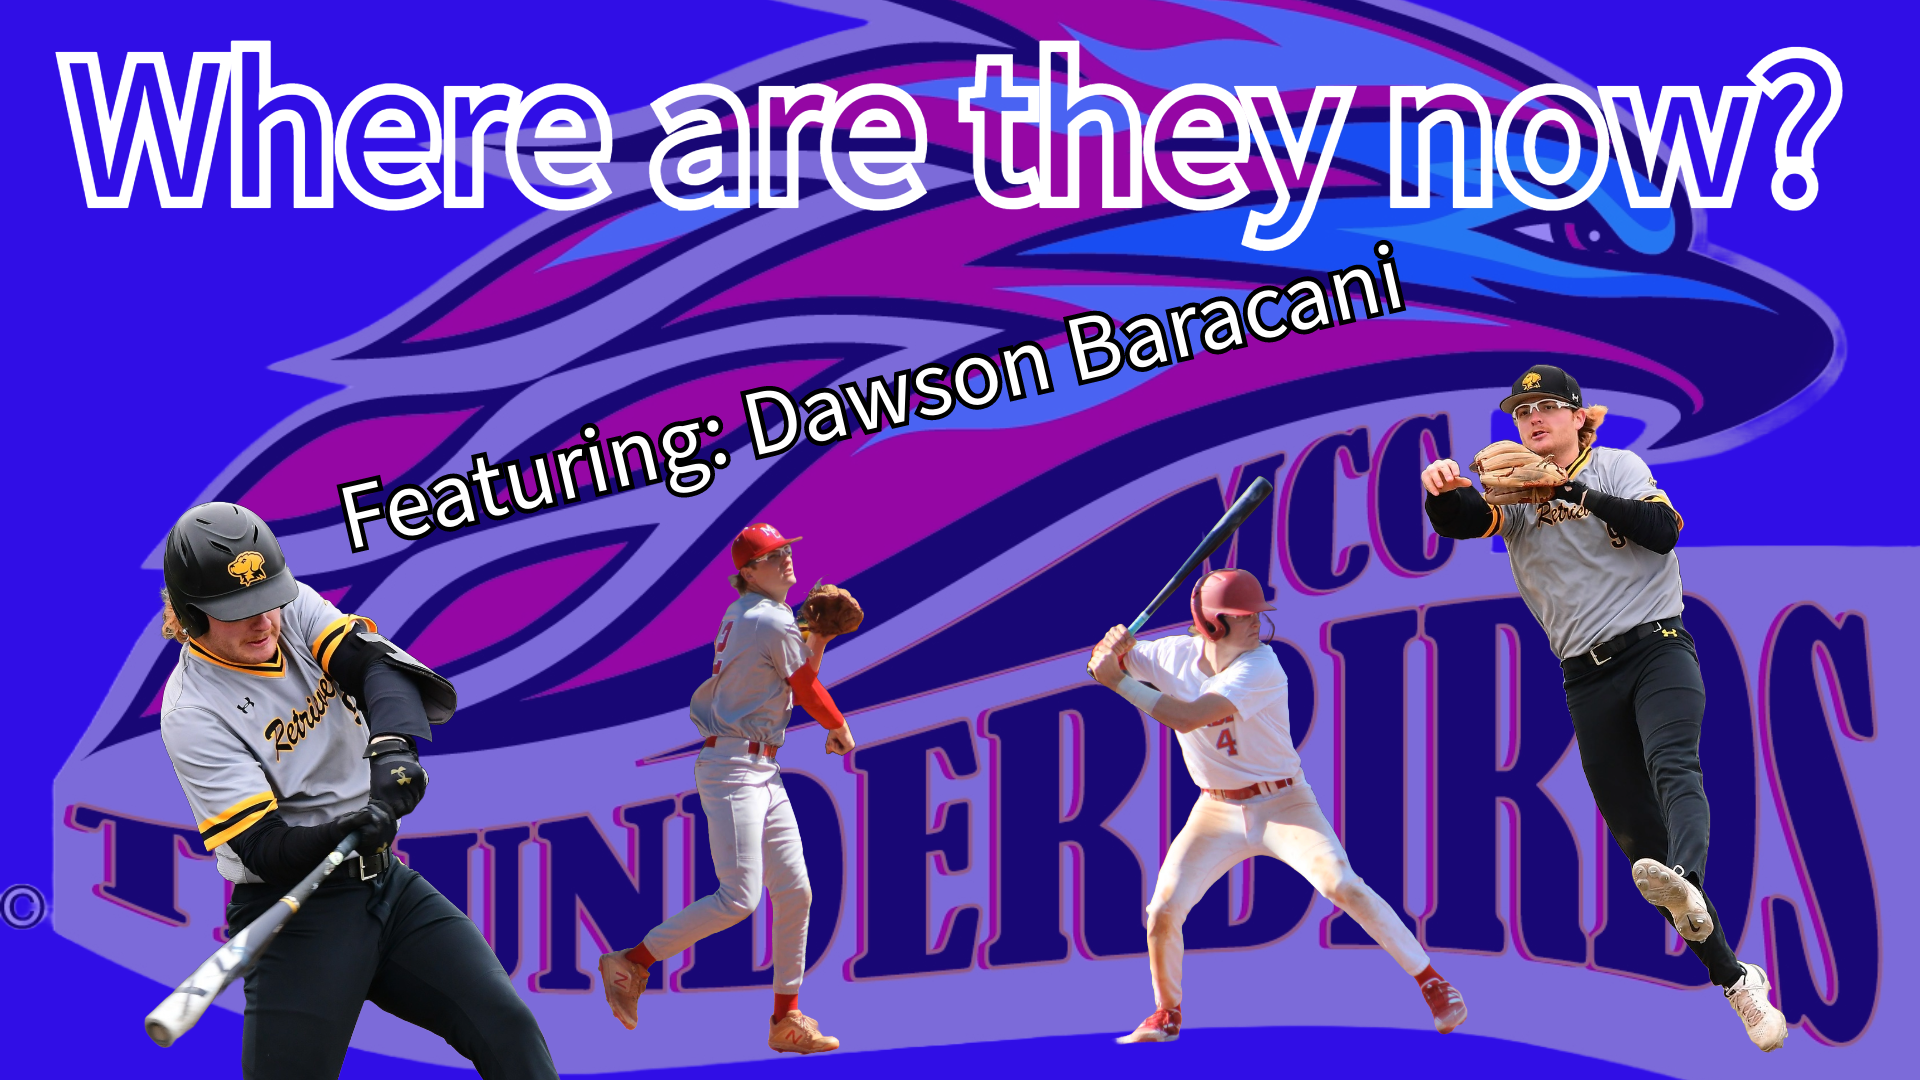 Where are they now? Featuring Dawson Baracani